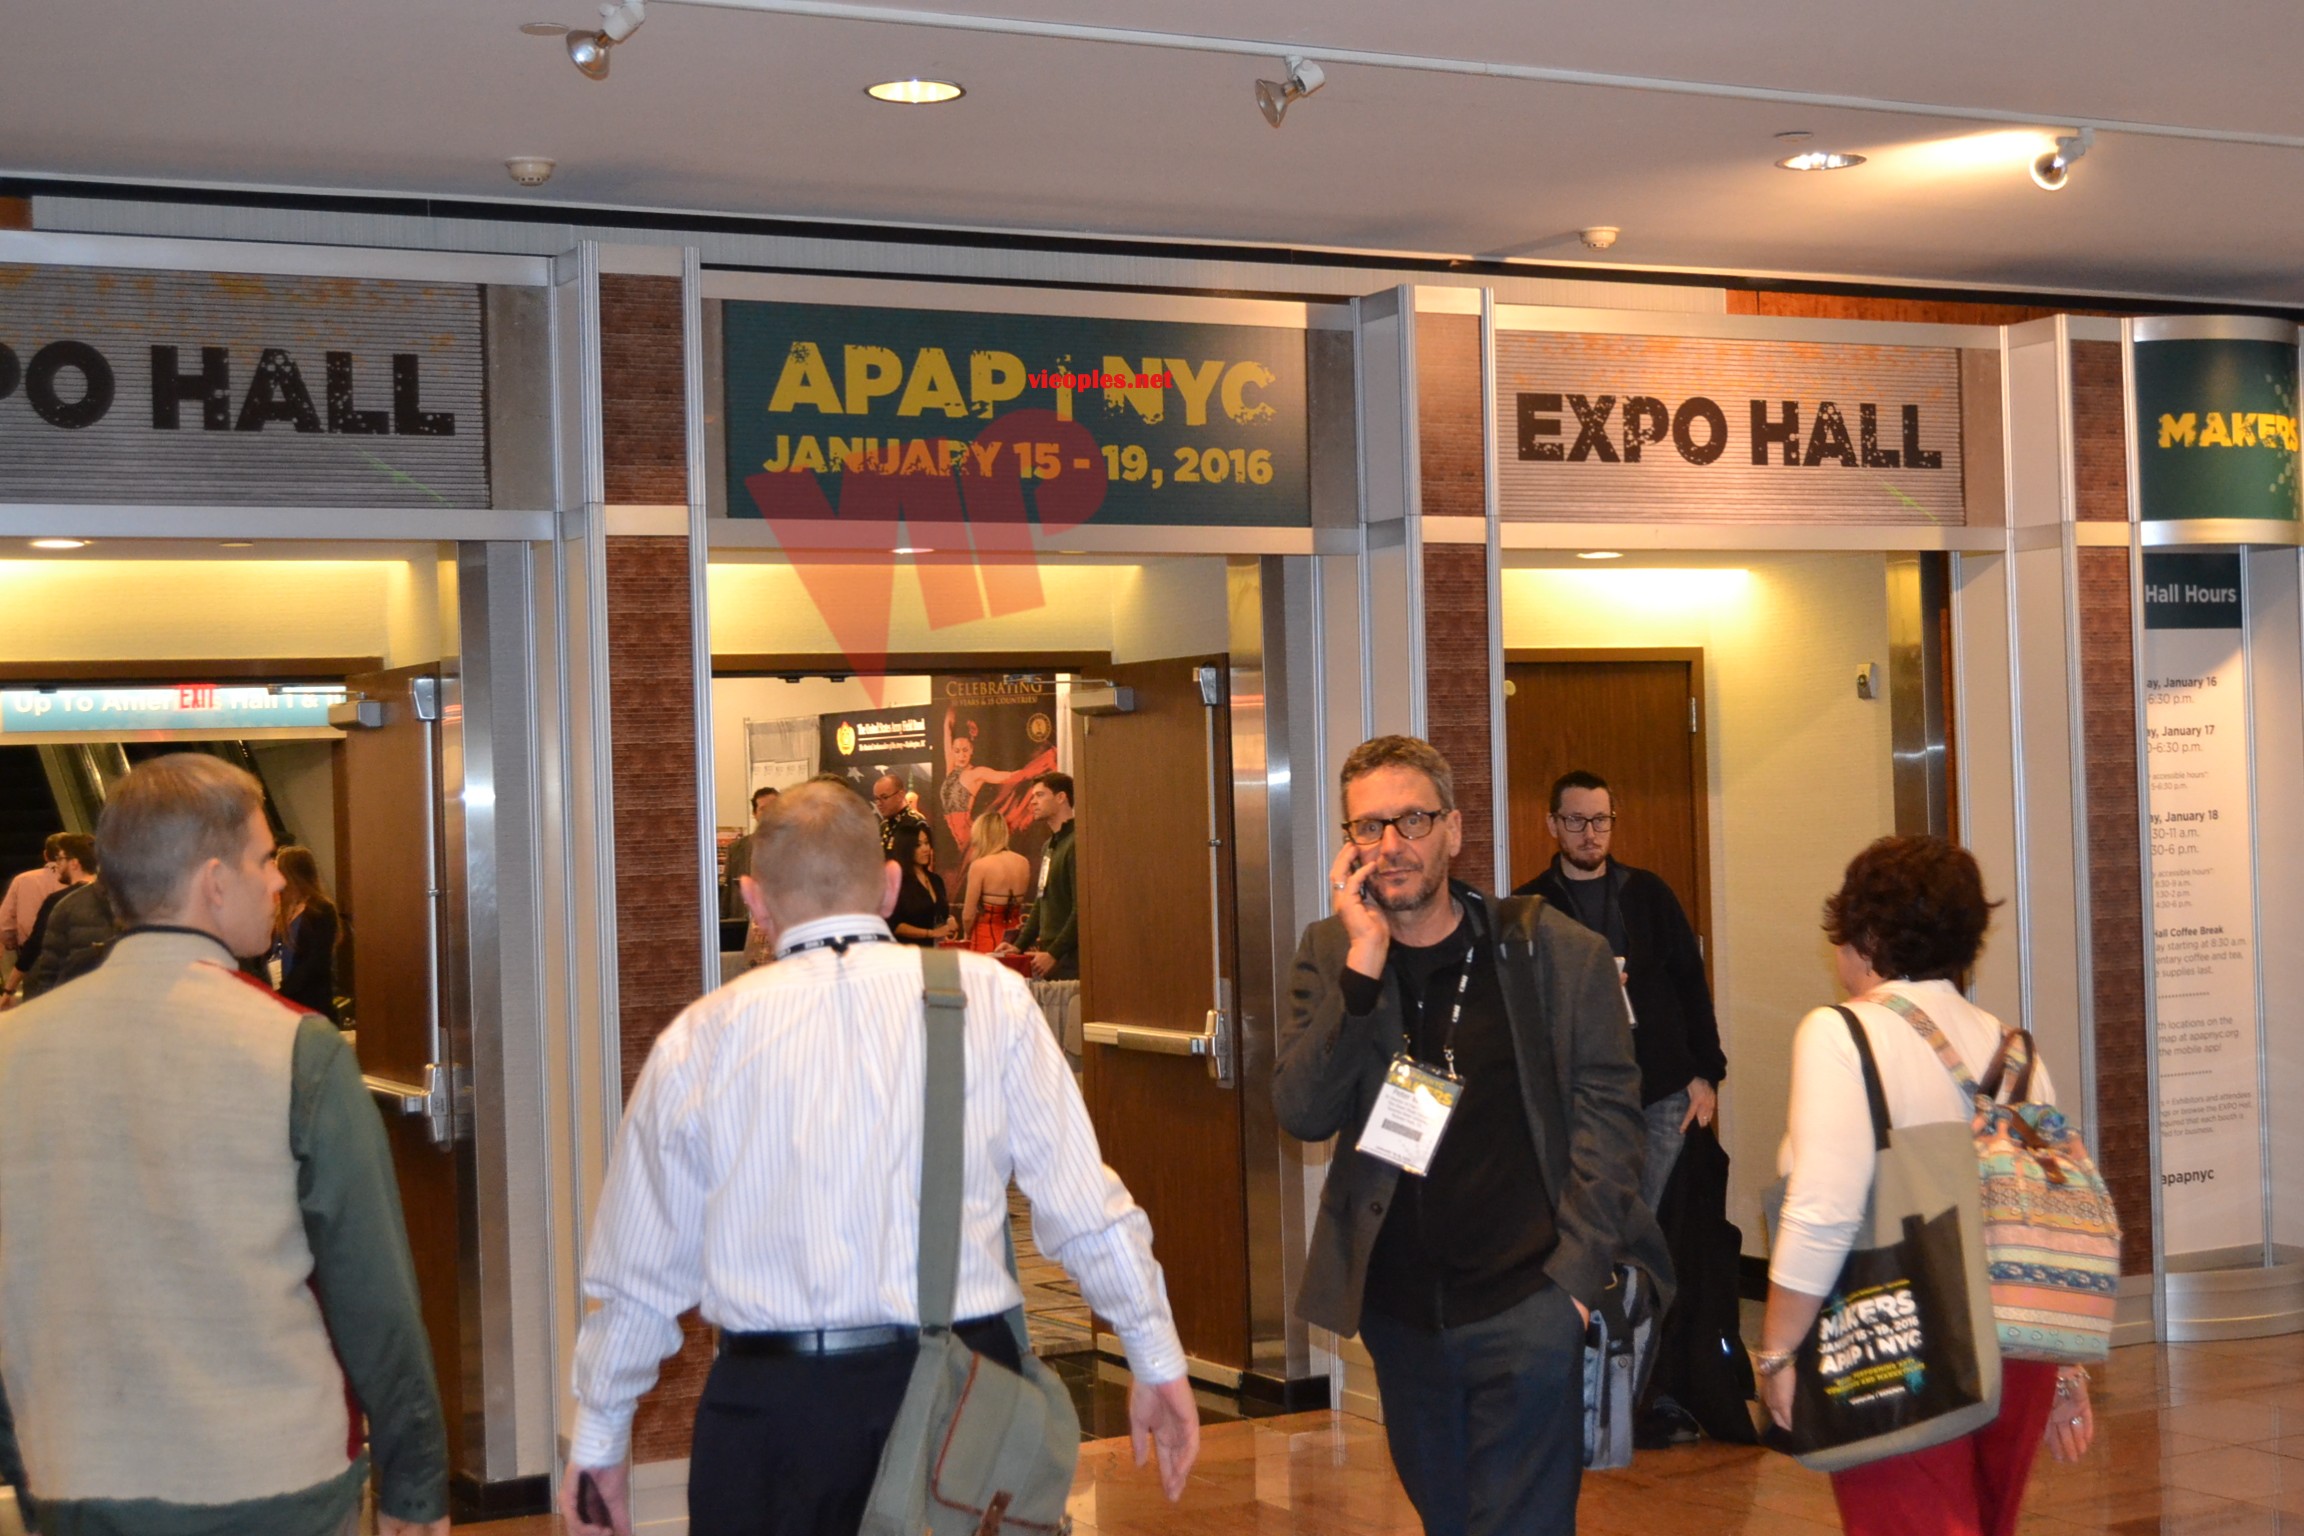 APAP NYC 2016: Global Performing Arts Conference And Marketing à New York